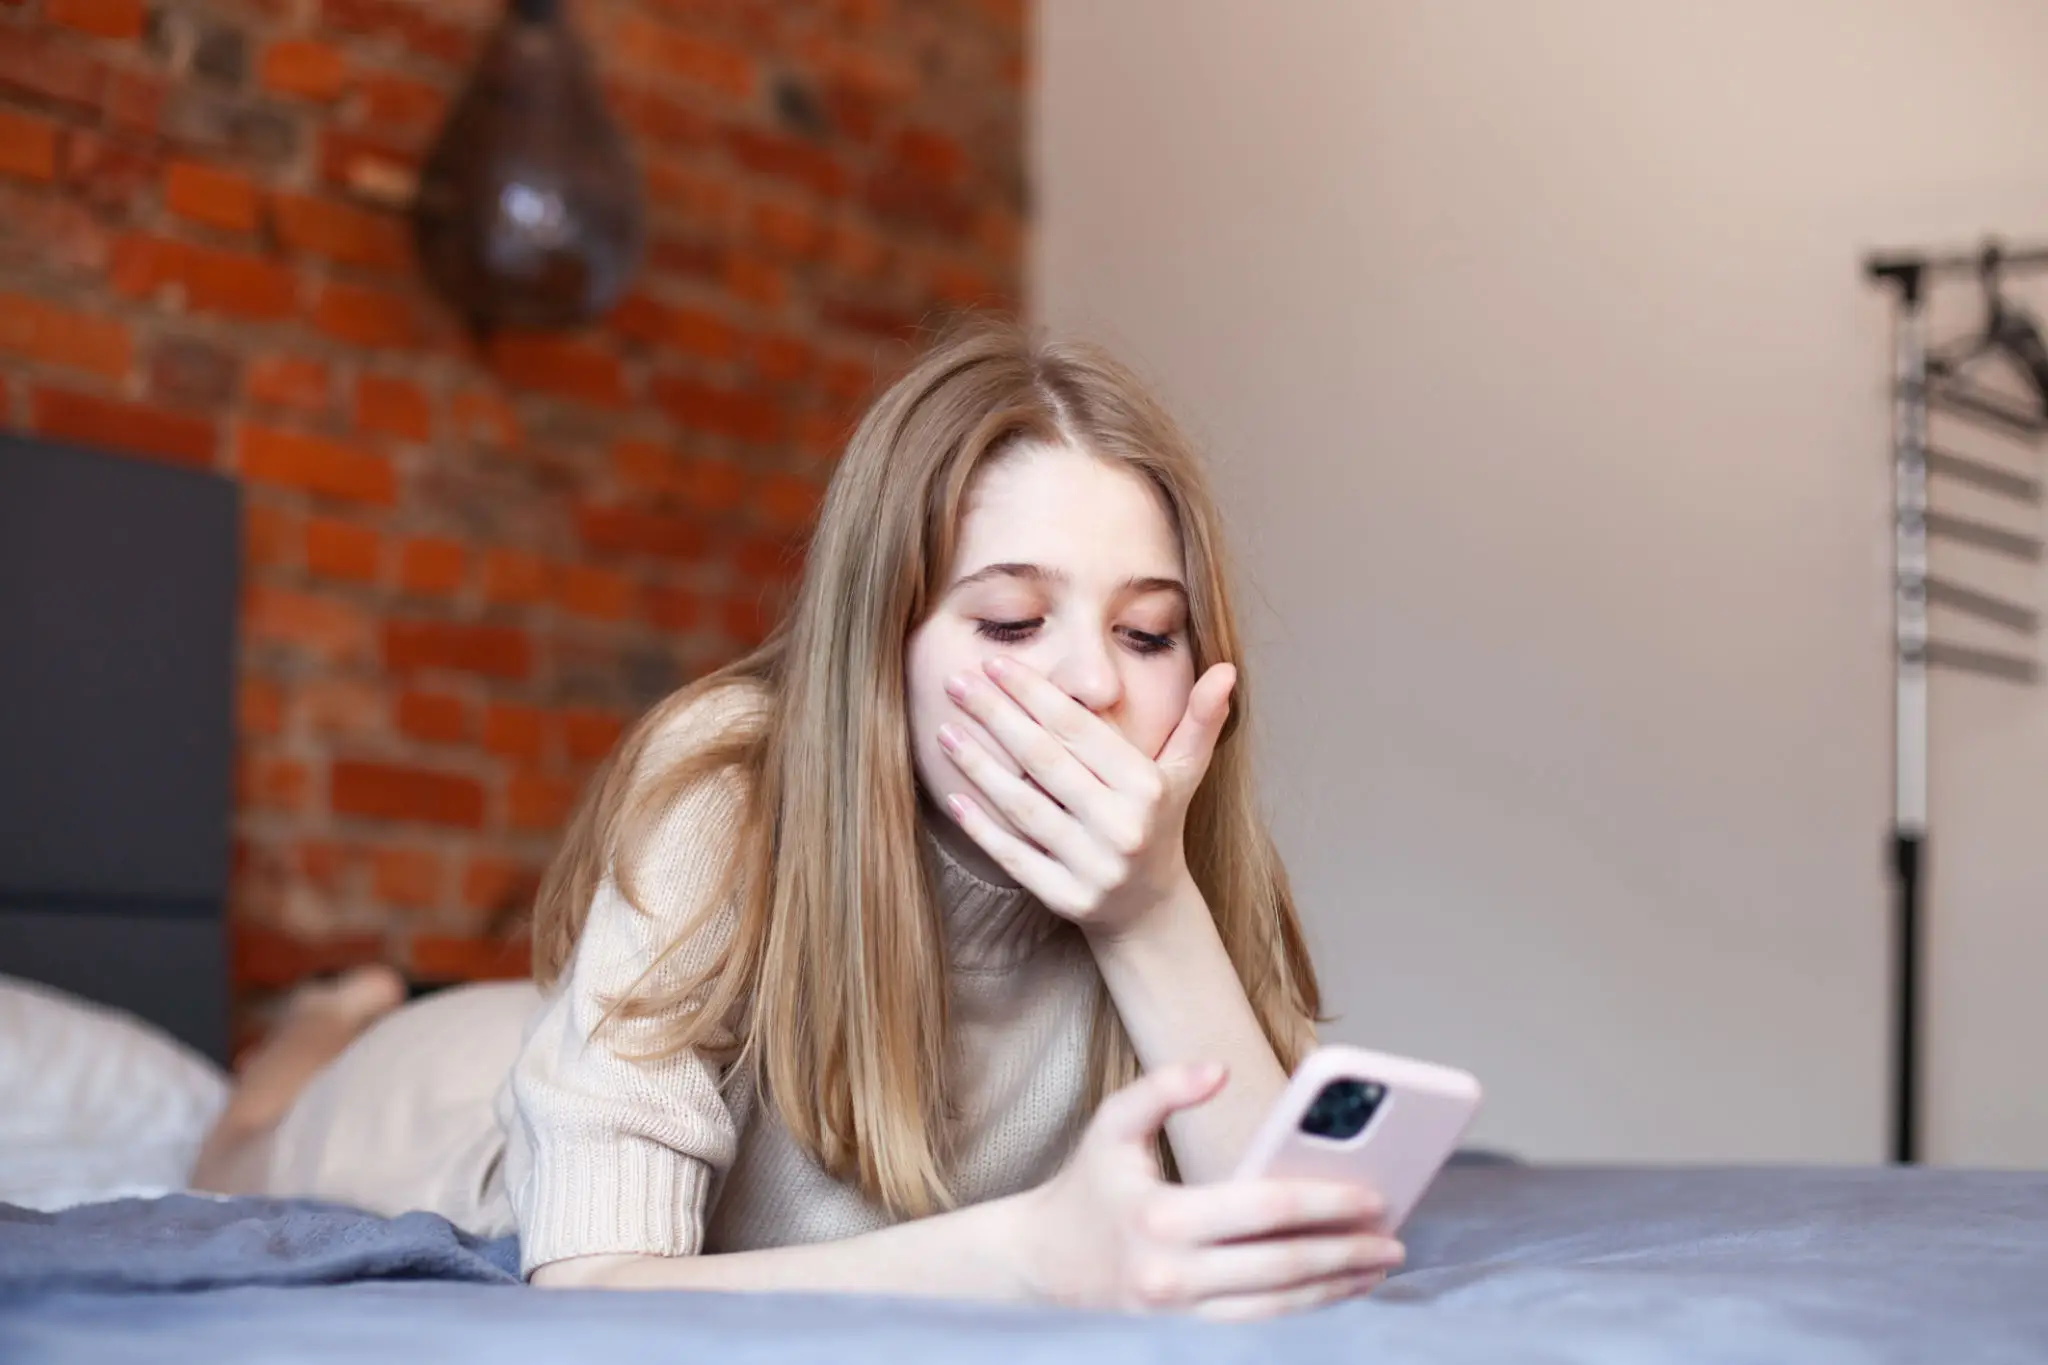 Surprised teen girl lying on bed looking at smartphone covering mouth with hand.